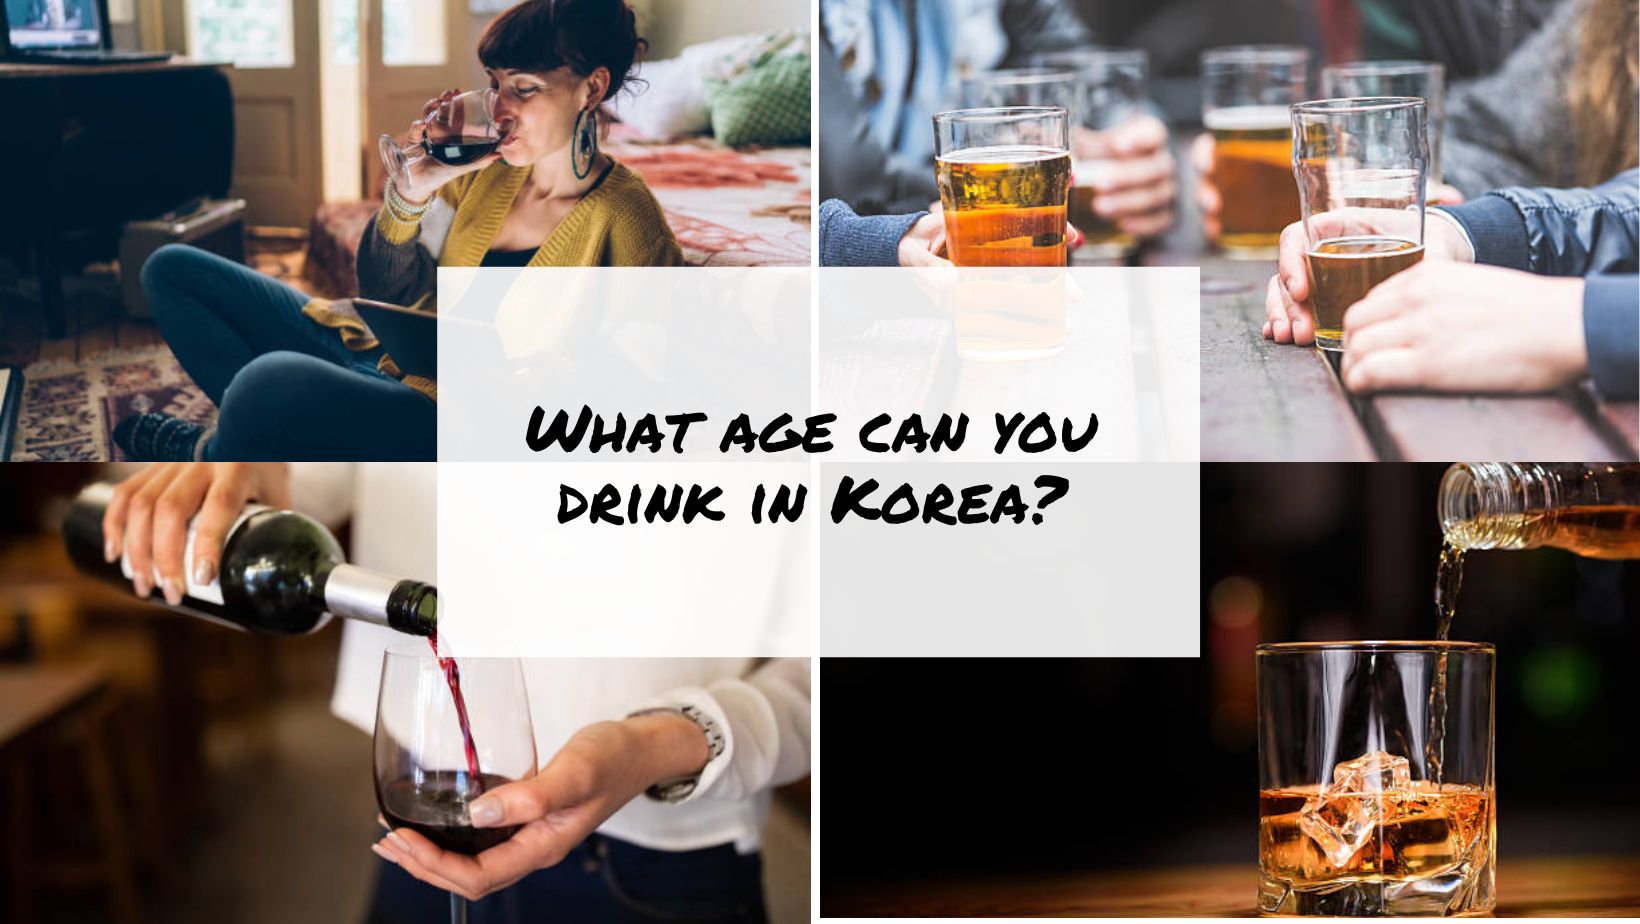 What age can you drink in Korea